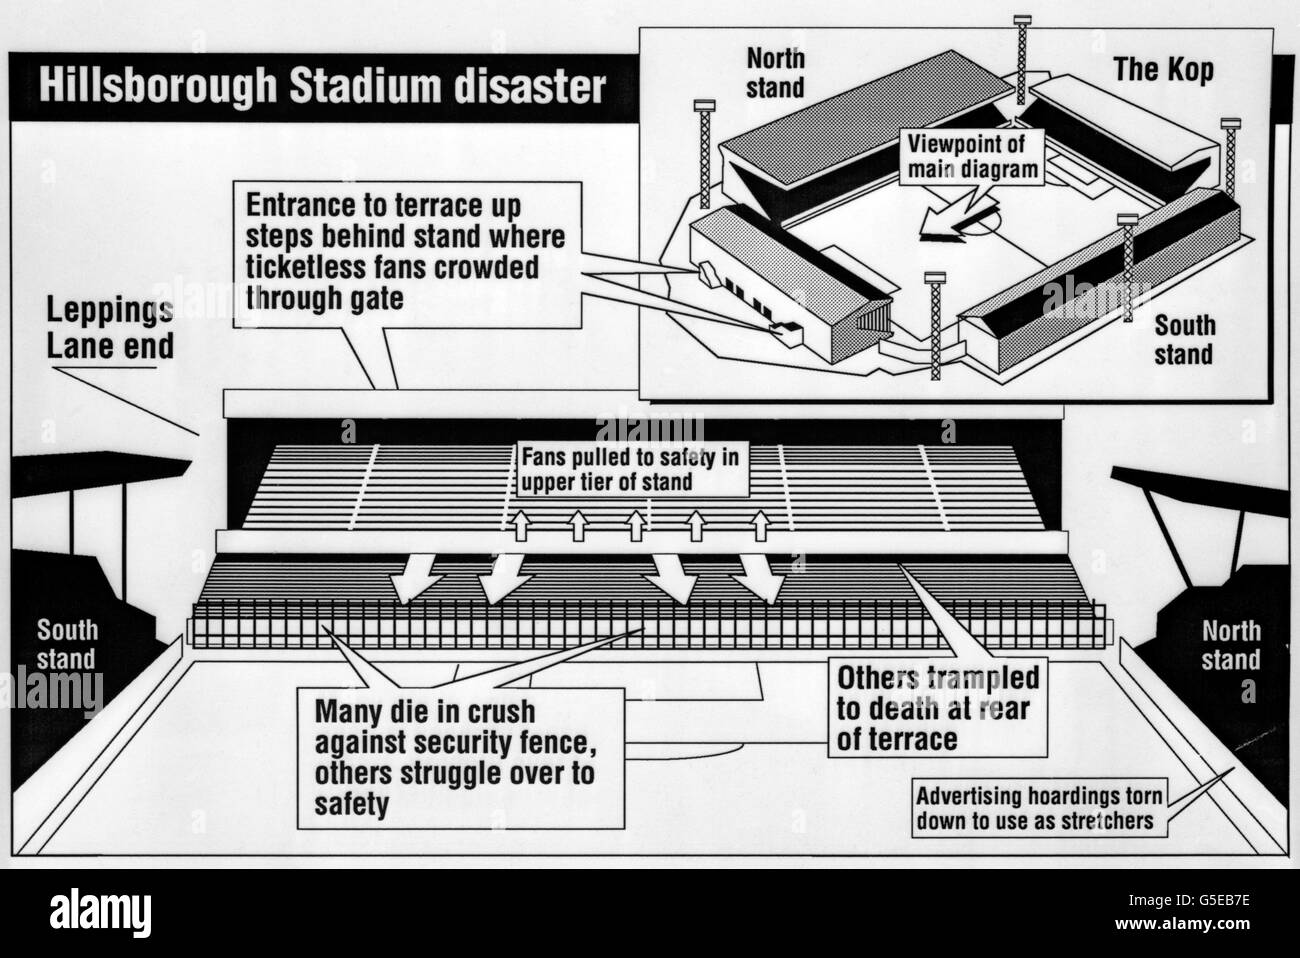 PA graphic showing details of Sheffield Wednesday's Hillsborough Stadium, and the area's where the tragedy unfolded during the FA Cup semi final between Nottingham Forest and Liverpool. Stock Photo